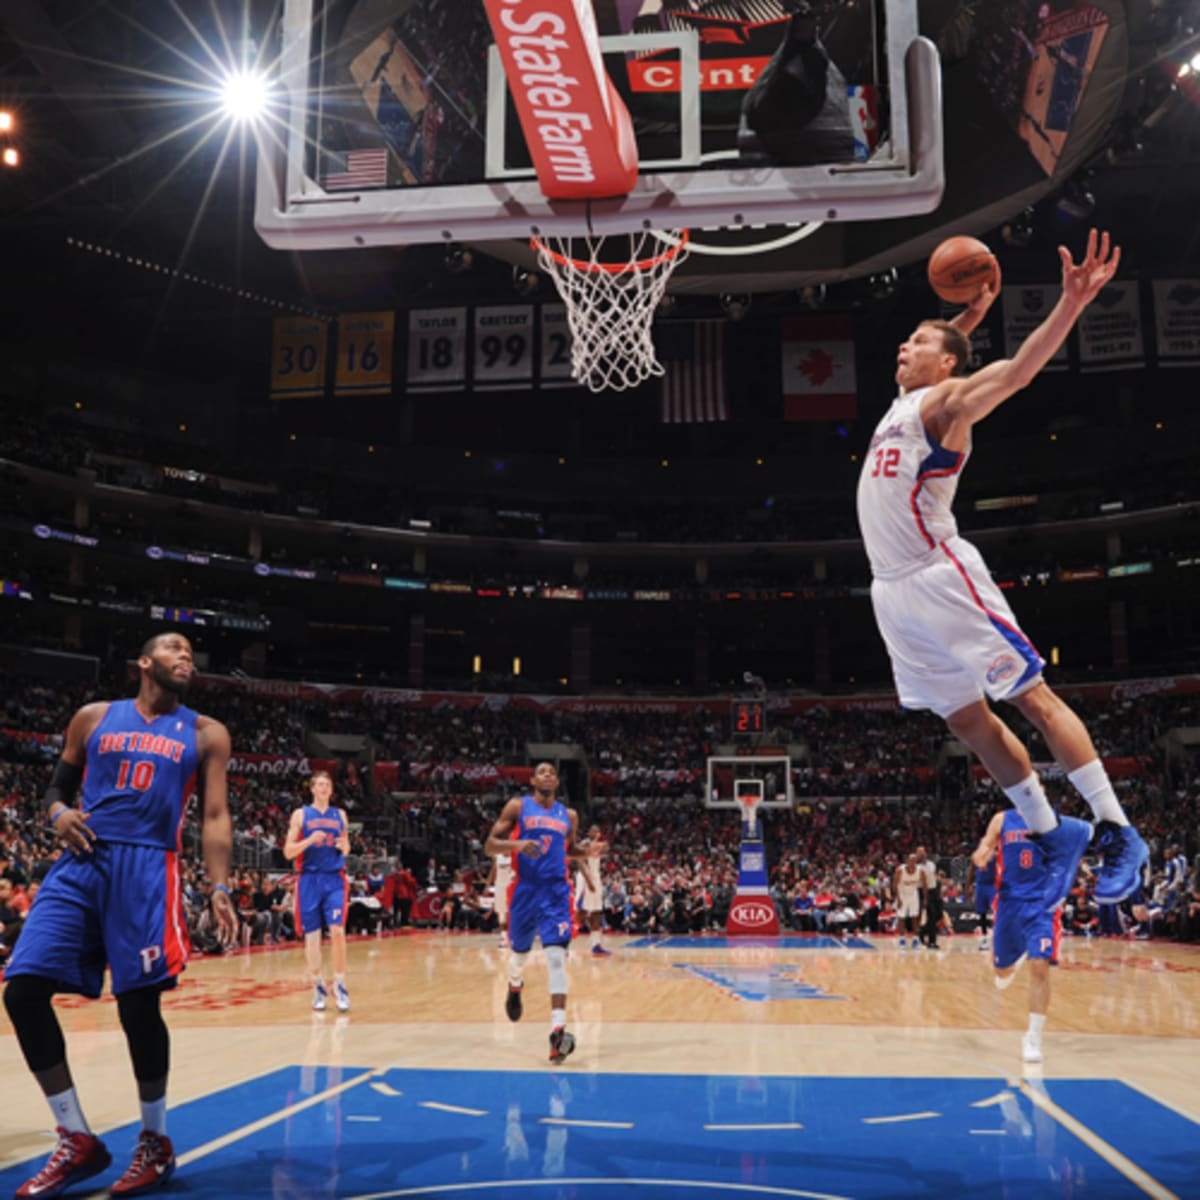 Blake Griffin: 'The Last Couple Years All I've Heard Is How Bad I Am